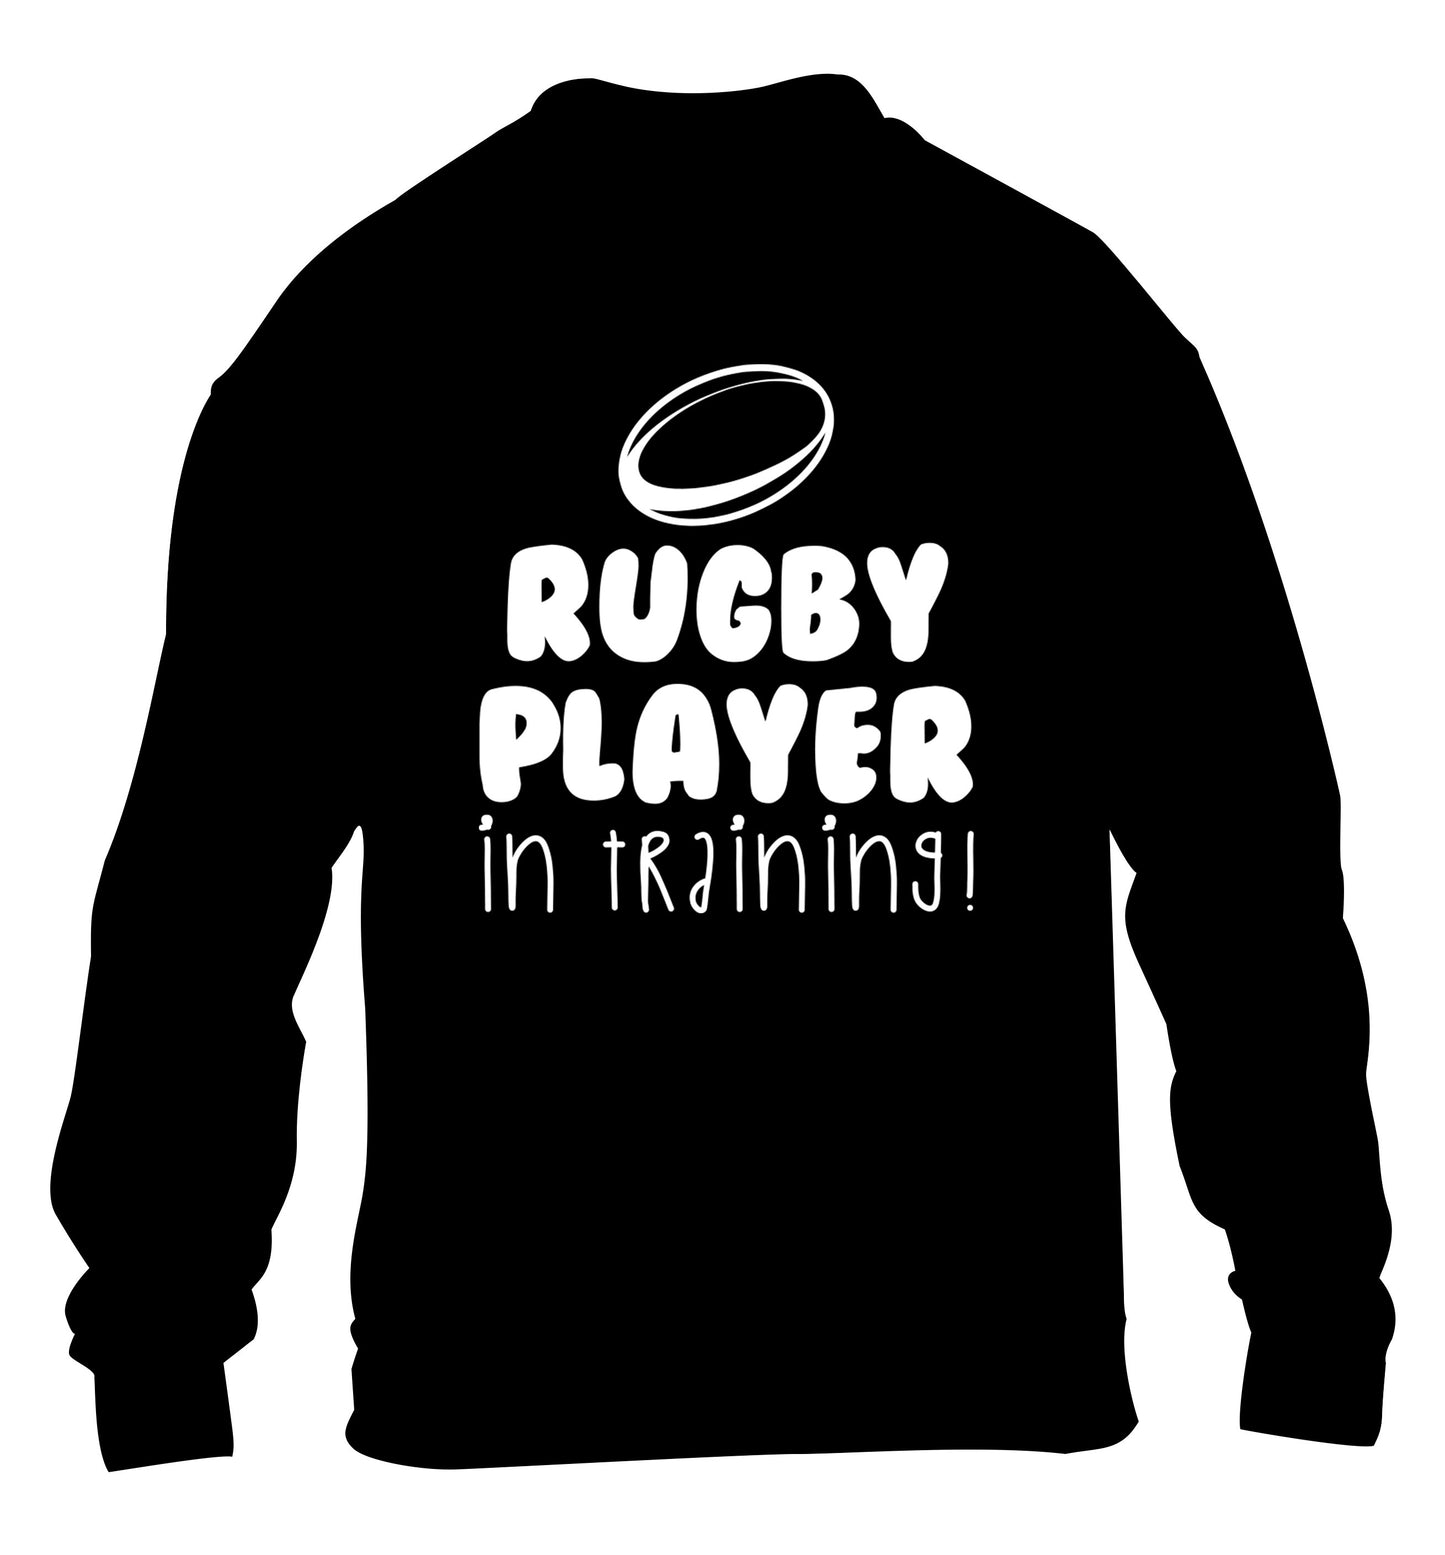 Rugby player in training children's black sweater 12-14 Years